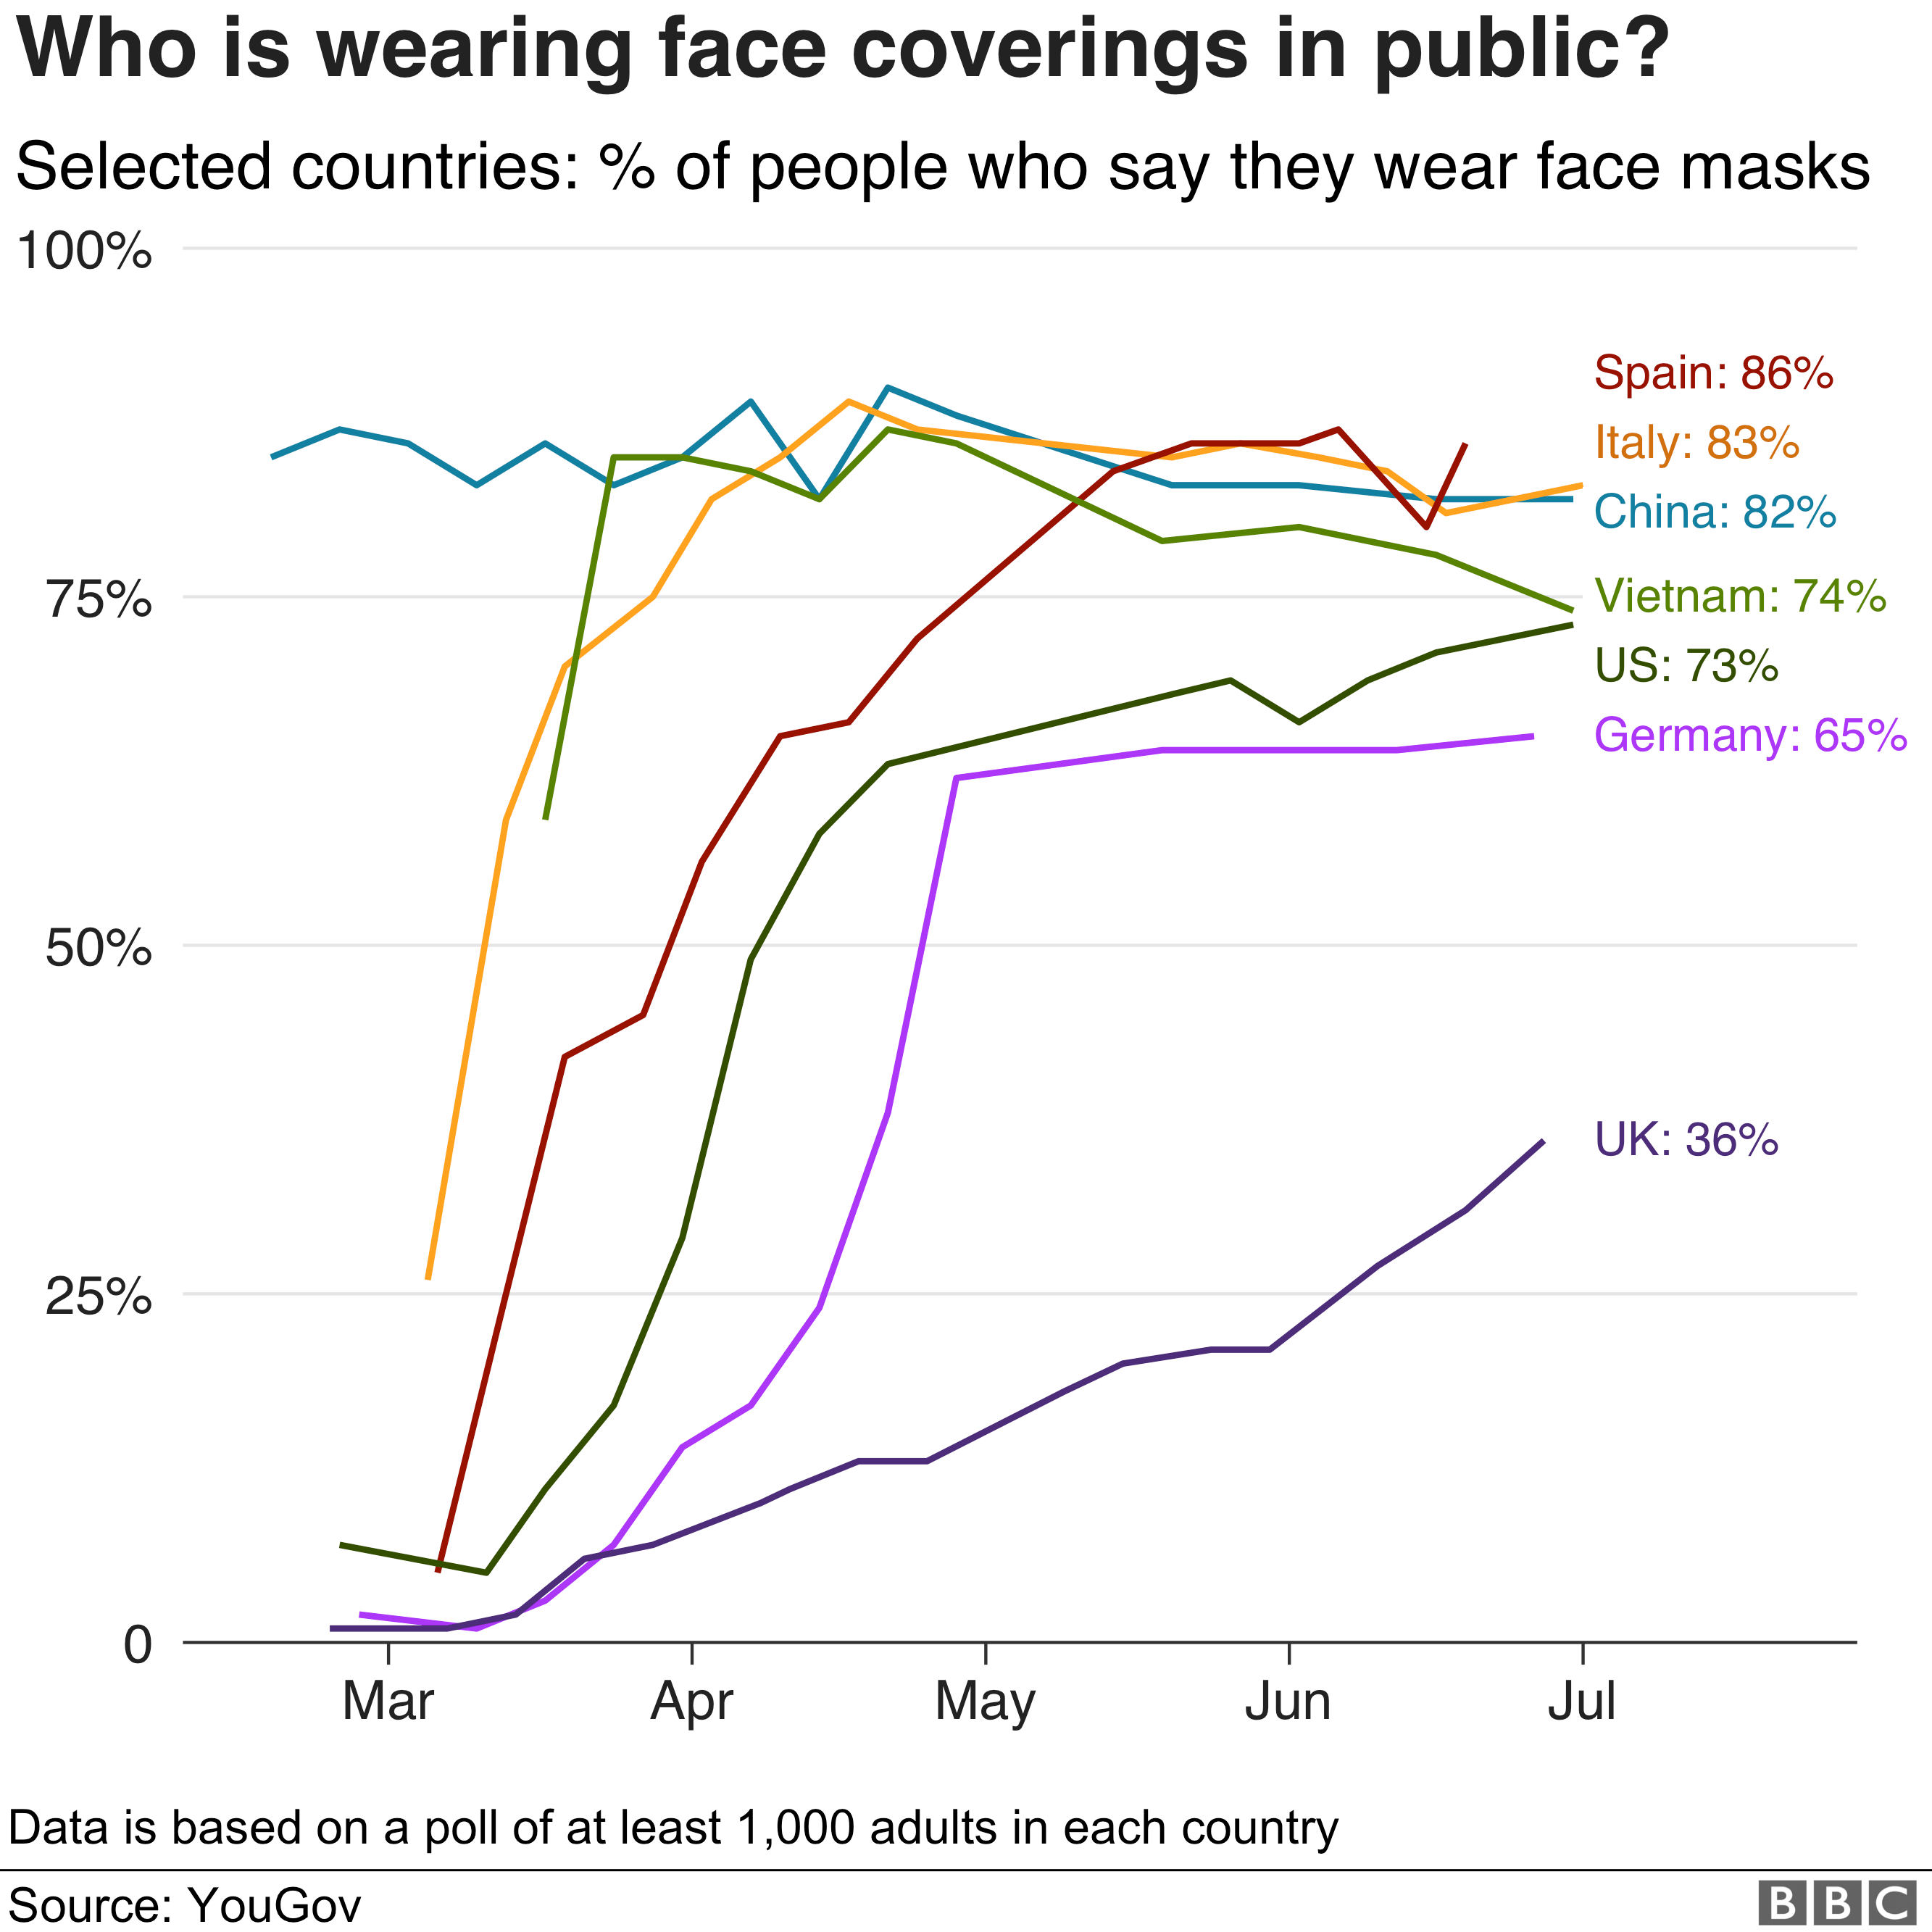 Who is wearing face coverings in public? - enlarge